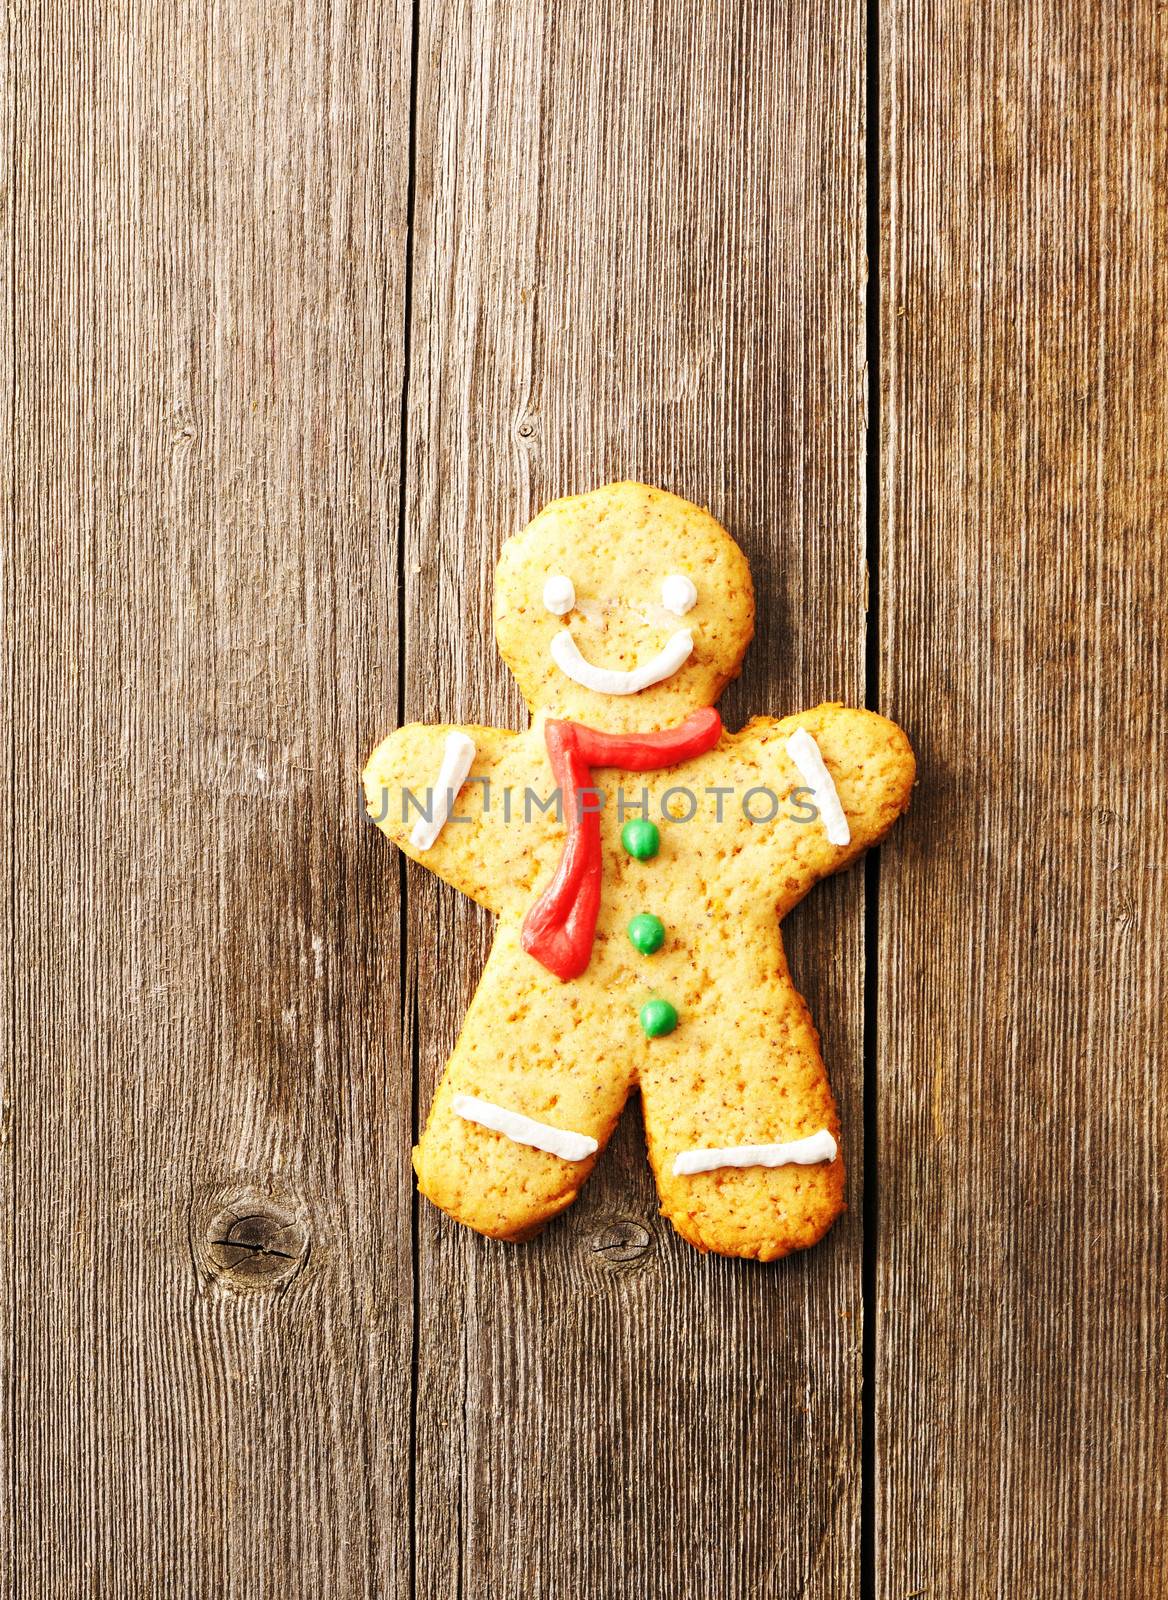 Christmas homemade gingerbread man over wooden table